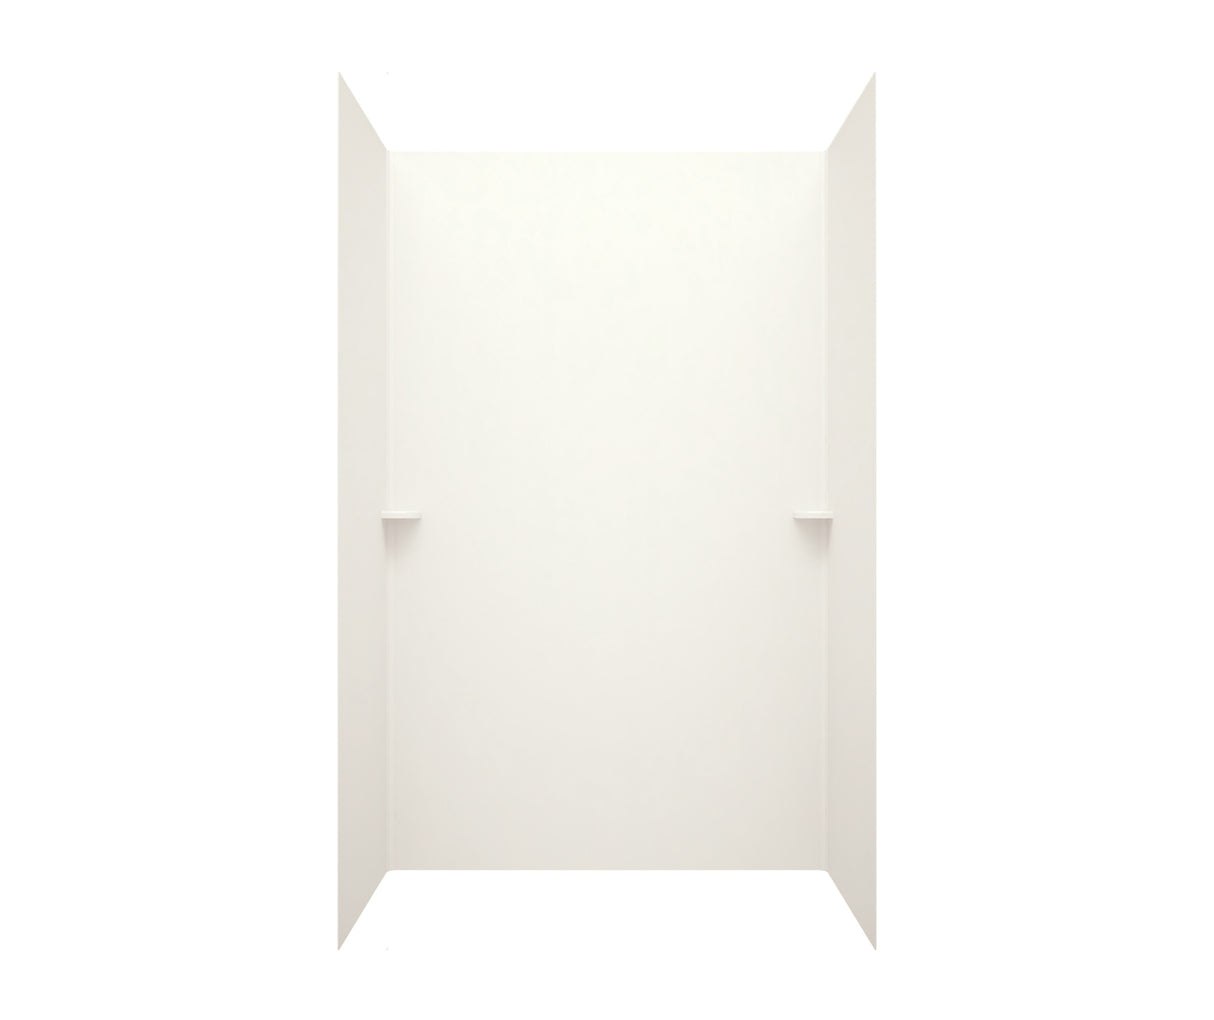 Swanstone SK-363696 36 x 36 x 96 Swanstone Smooth Glue up Shower Wall Kit in Bisque SK363696.018